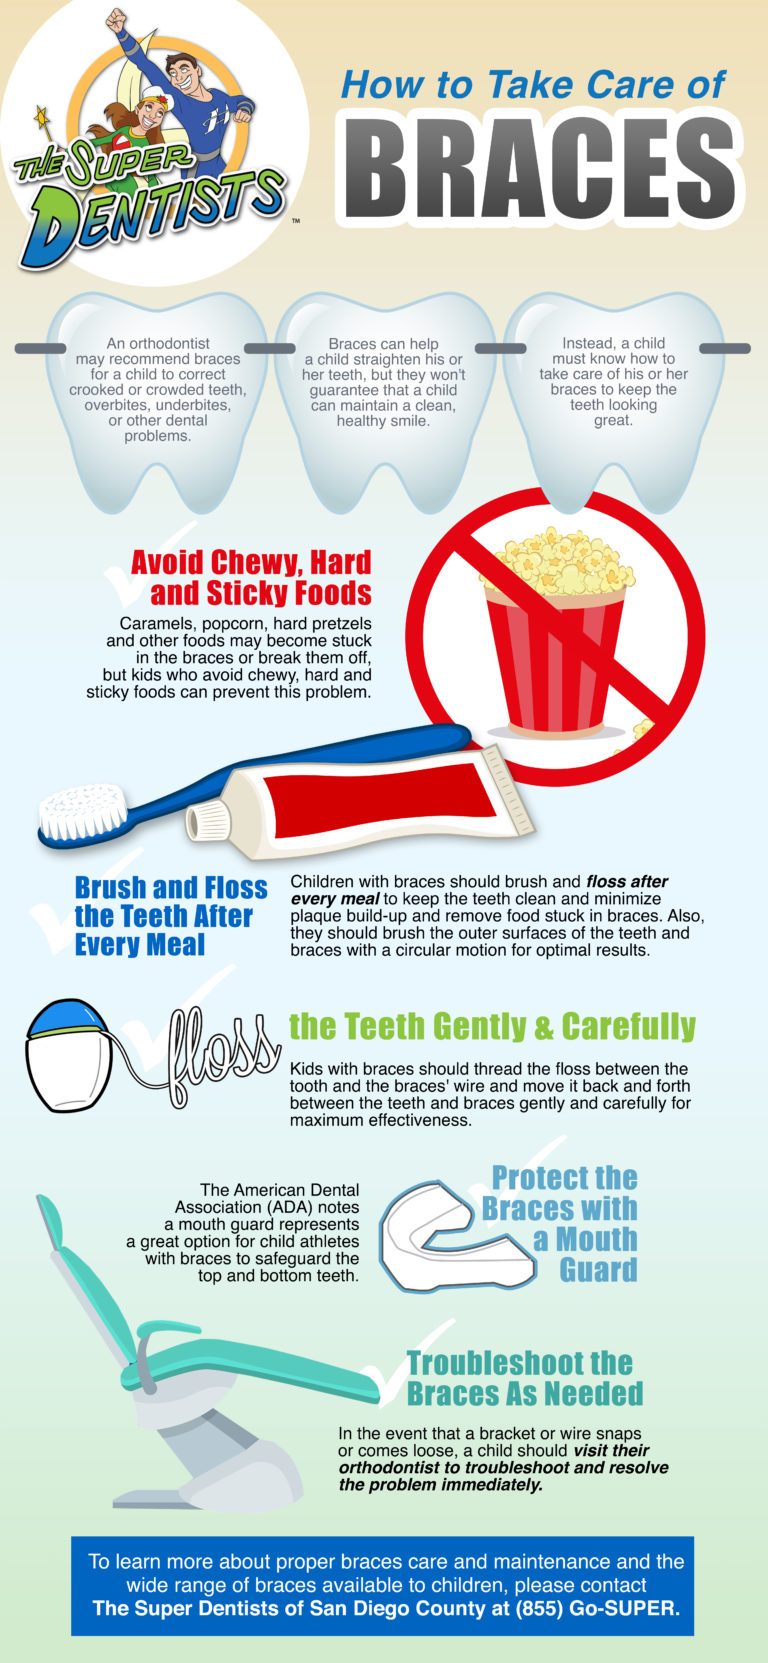 How To Take Care of Braces